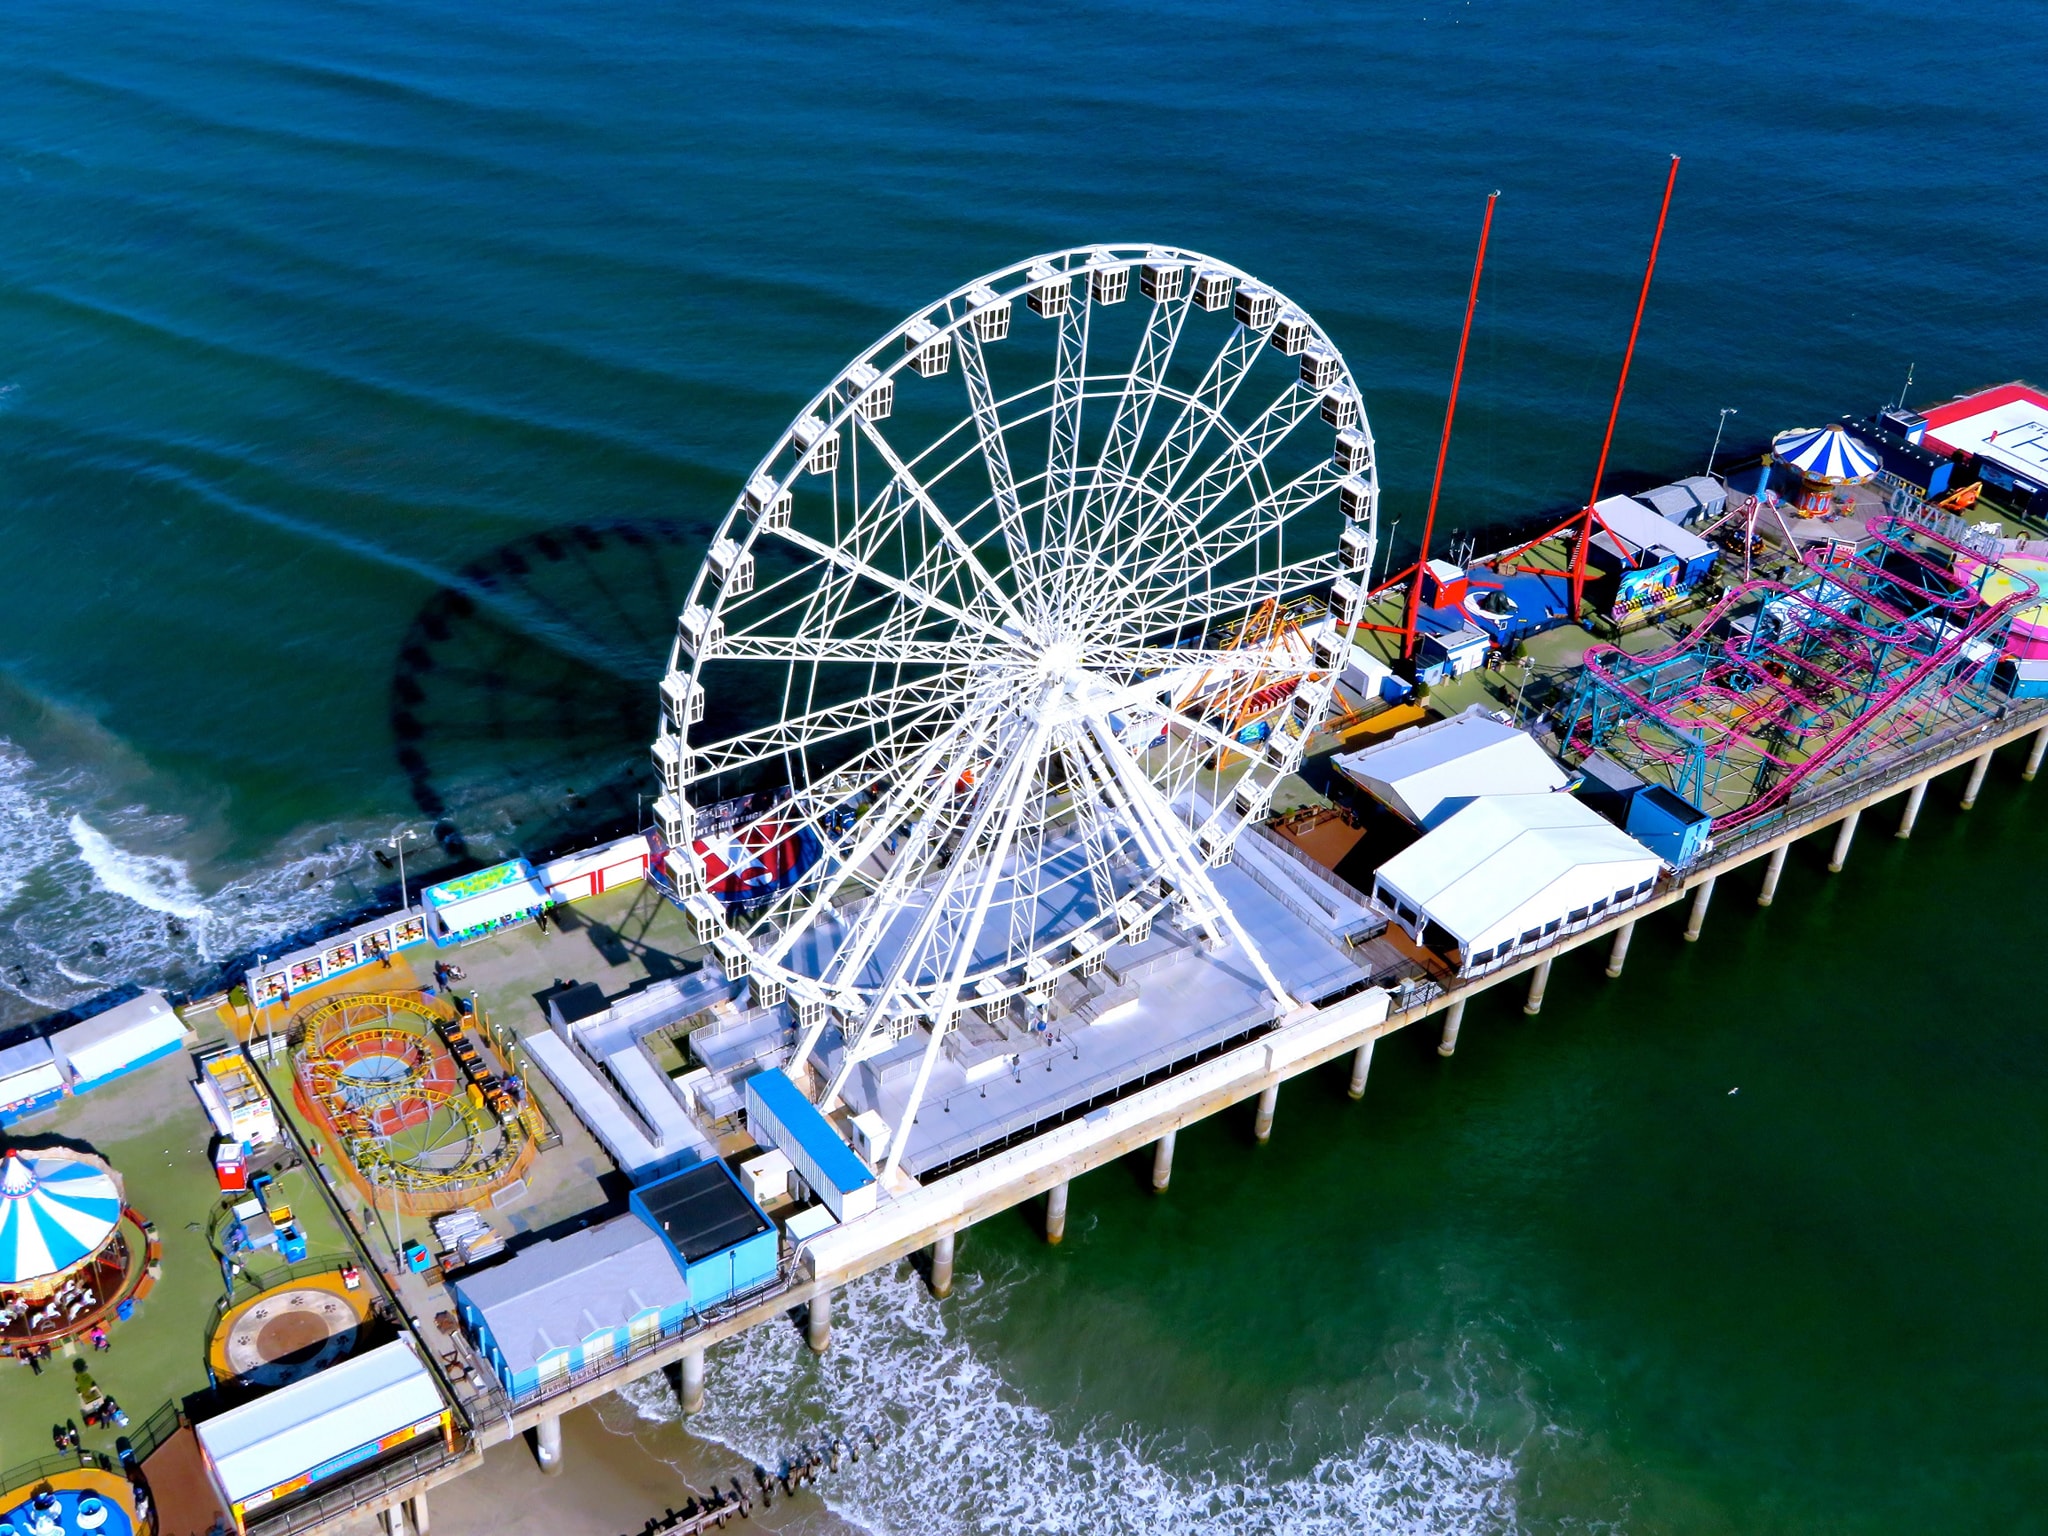 Steel Pier in Atlantic City - Find Amusements, Food, and More Over